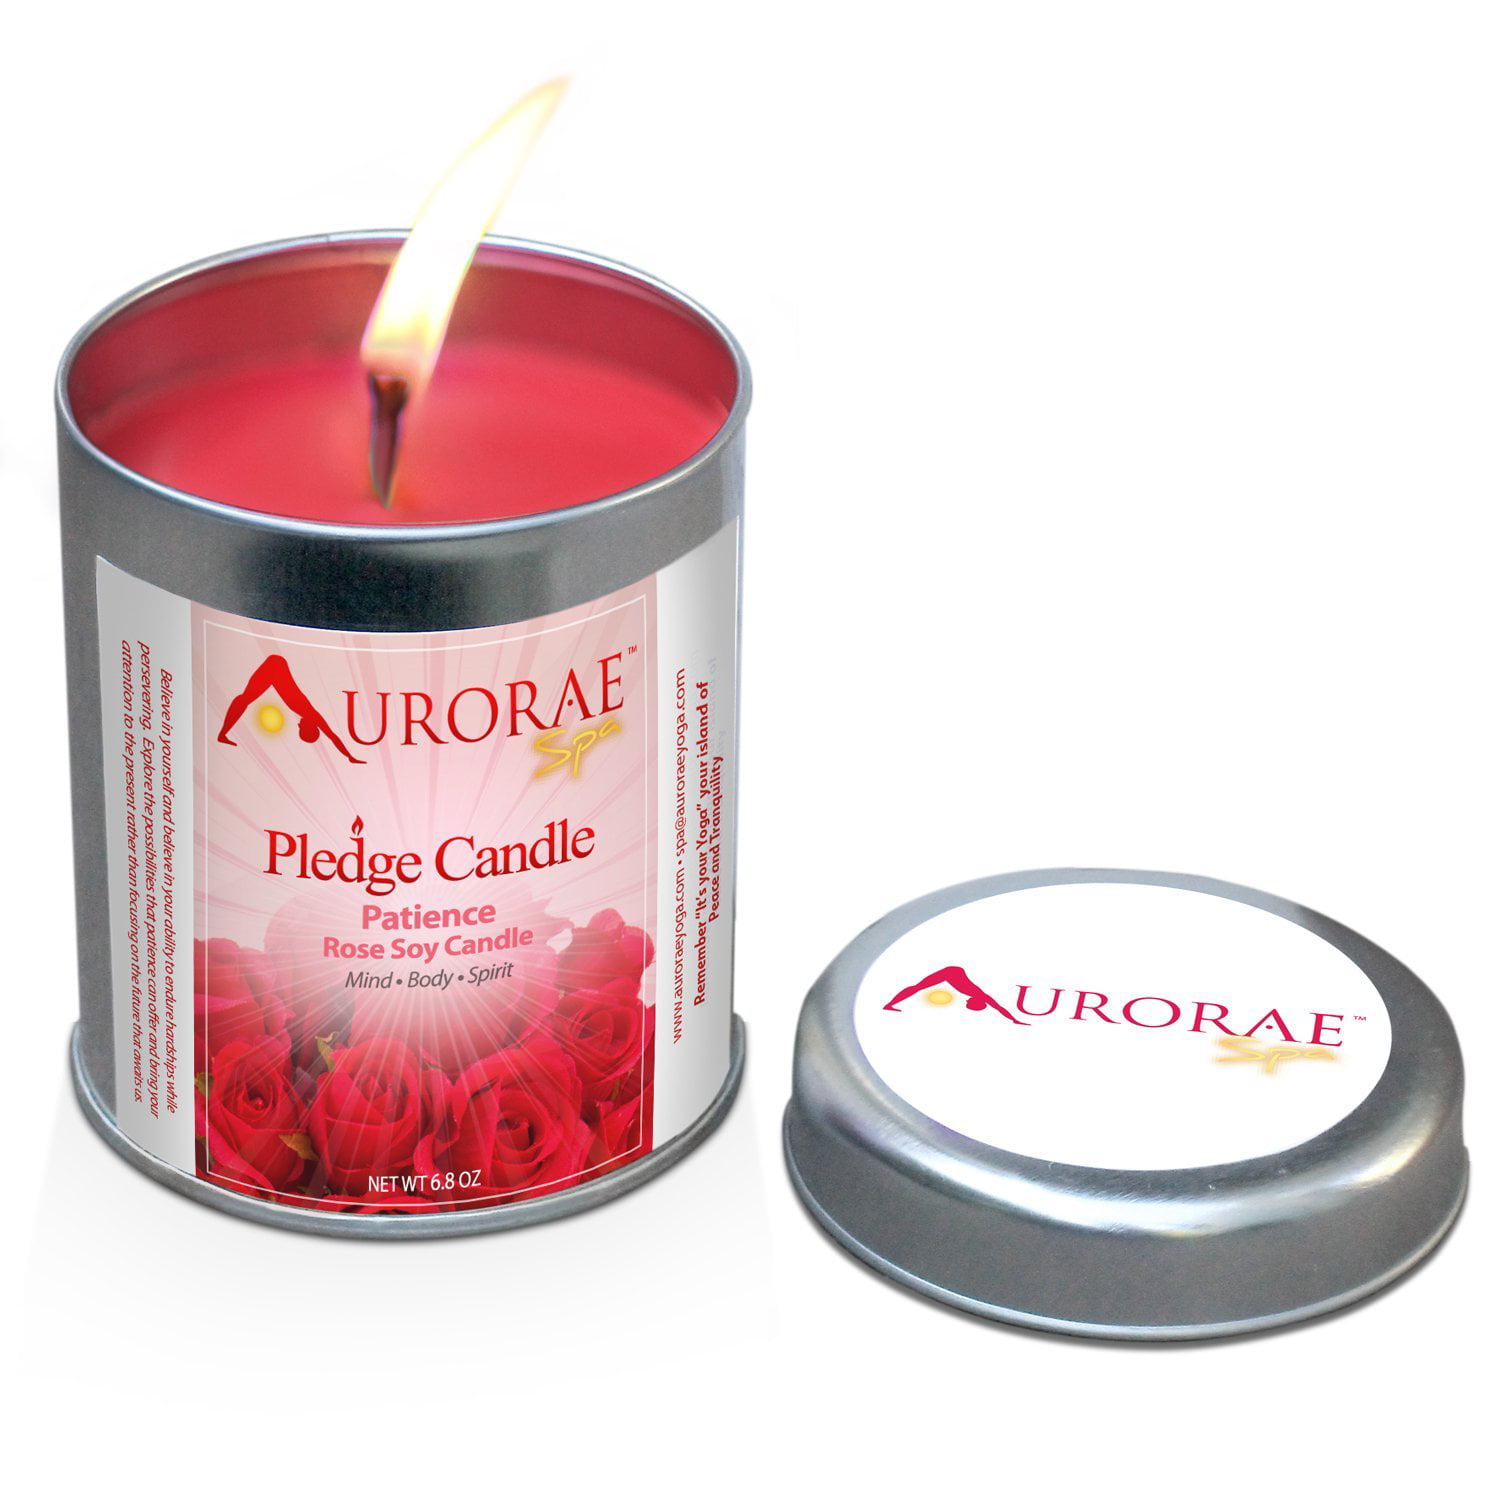 6.8oz Raspberry Scented 100% Soy Wax Aromatherapy Candles by Aurorae 